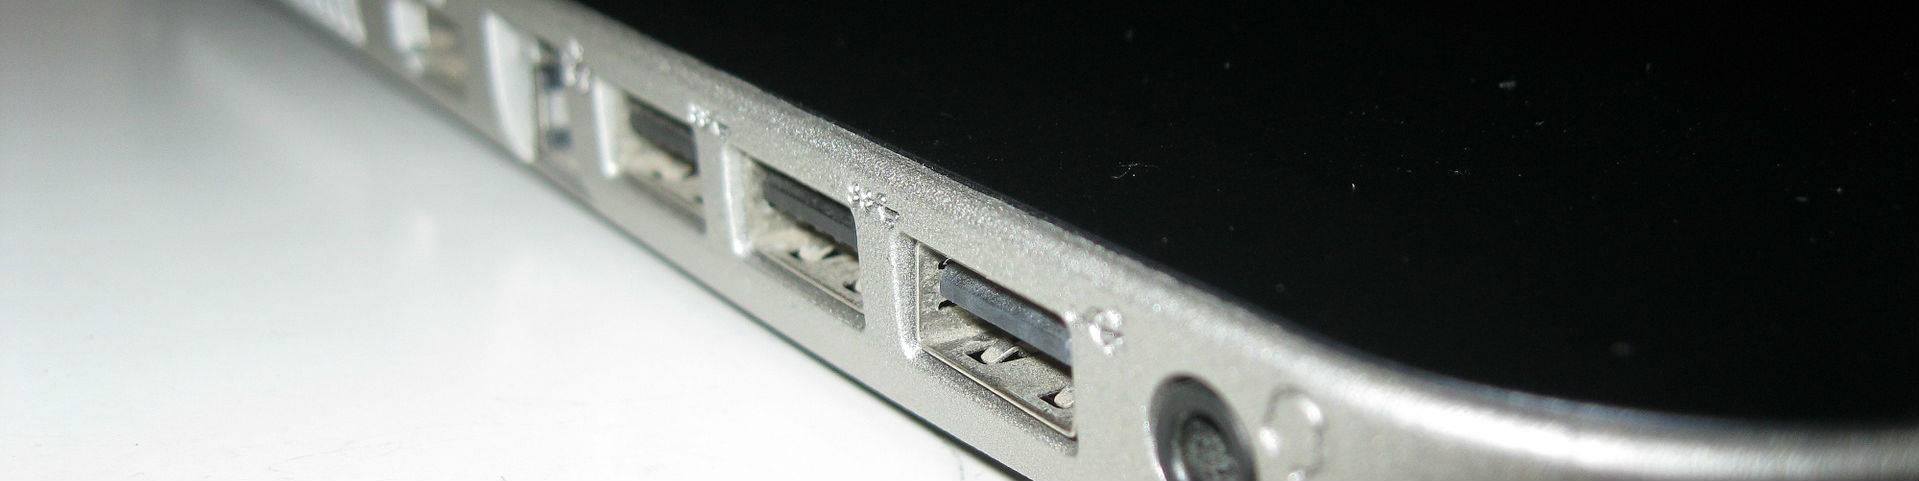 Multiple ports on the side of a laptop